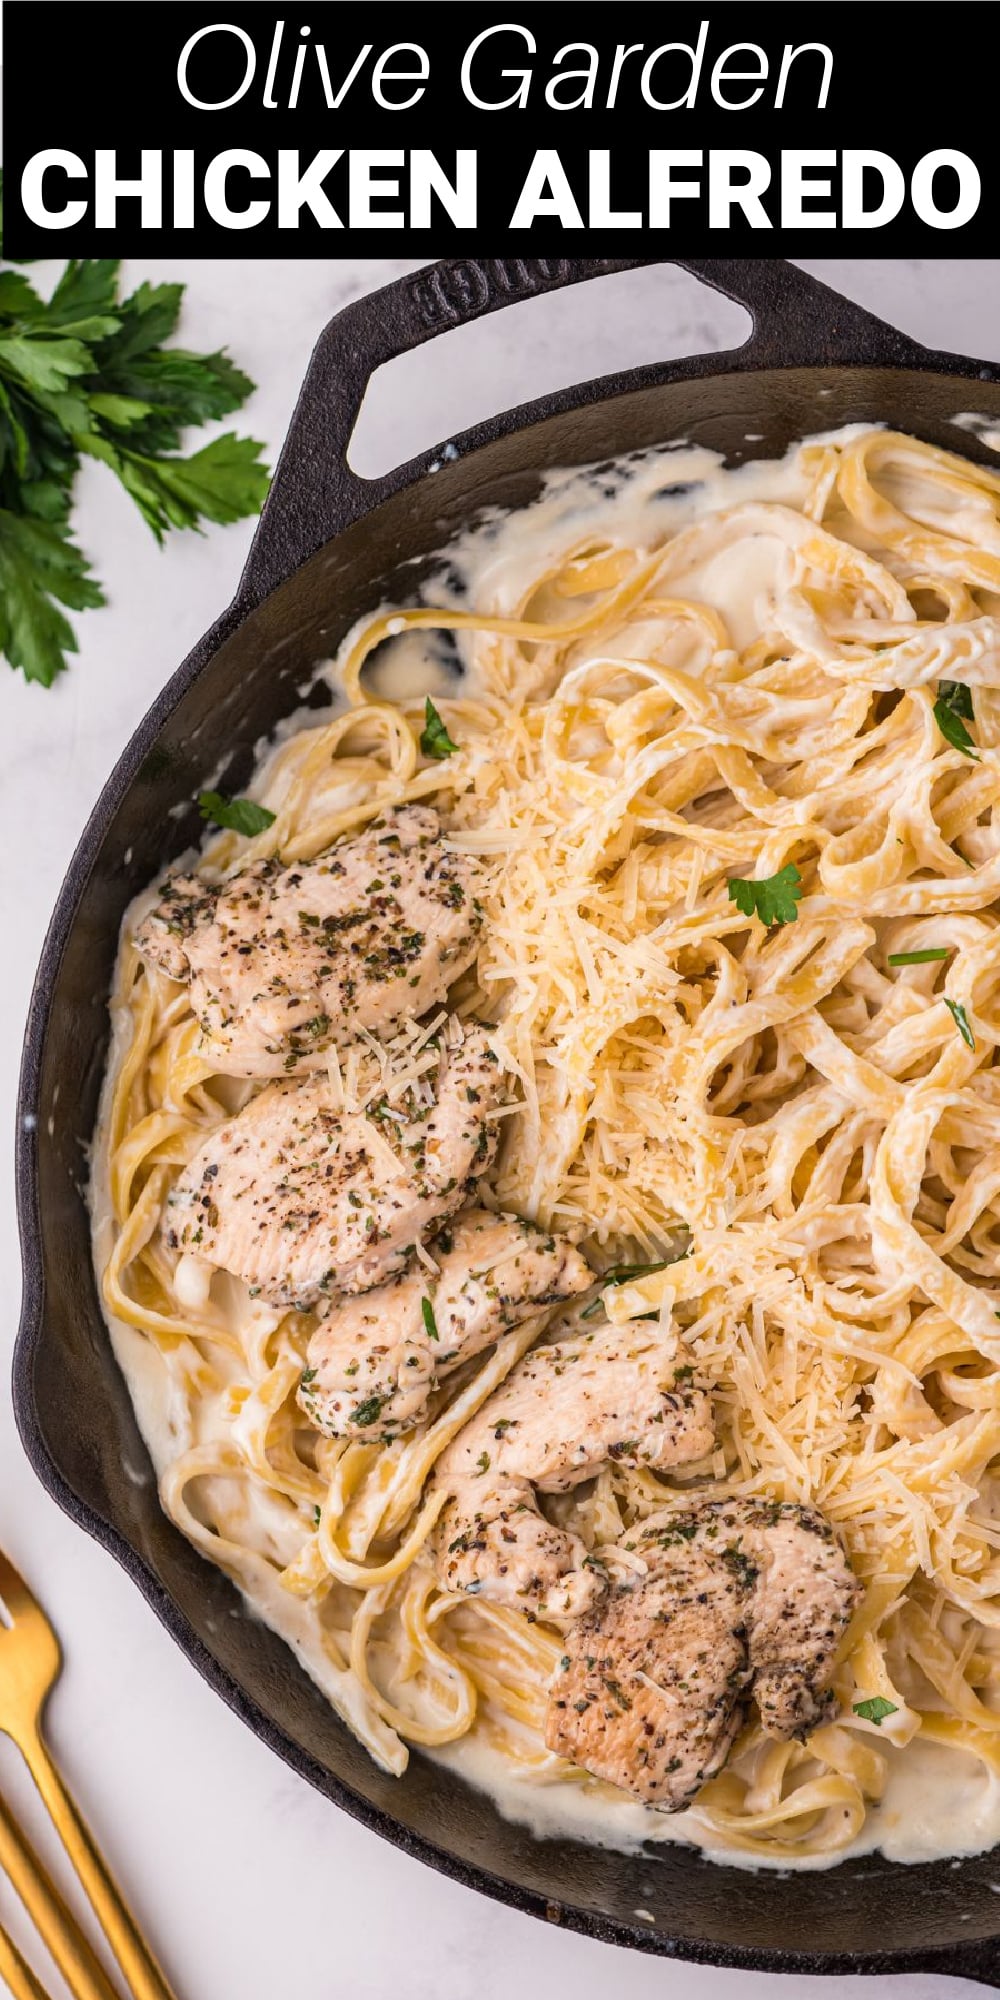 This delicious Homemade Chicken Alfredo features slices of tender chicken breasts that are pan seared to perfection, tossed with a rich and decadent homemade cheesy Alfredo sauce with fettuccini noodles. It’s a tasty classic pasta dish that’s easy to make and is a guaranteed crowd pleaser every time.